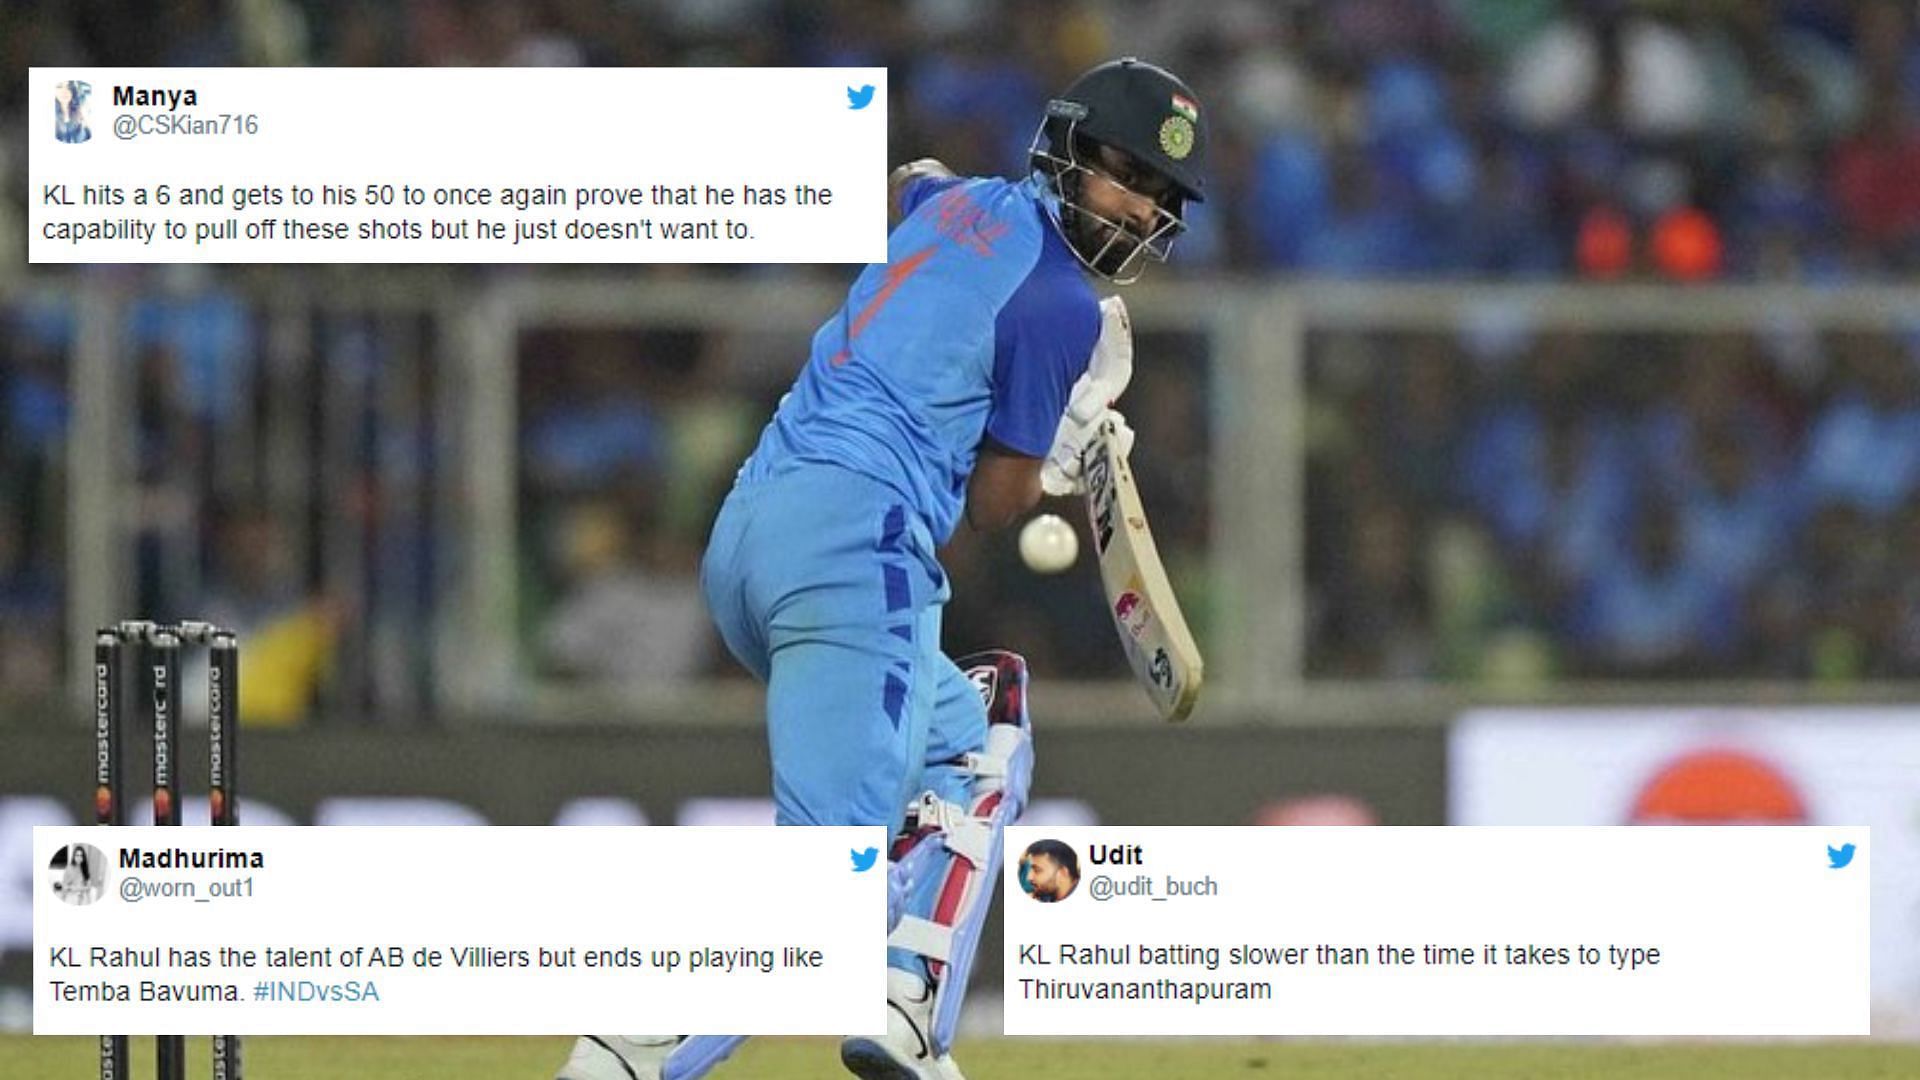 Fans were baffled by seeing KL Rahul